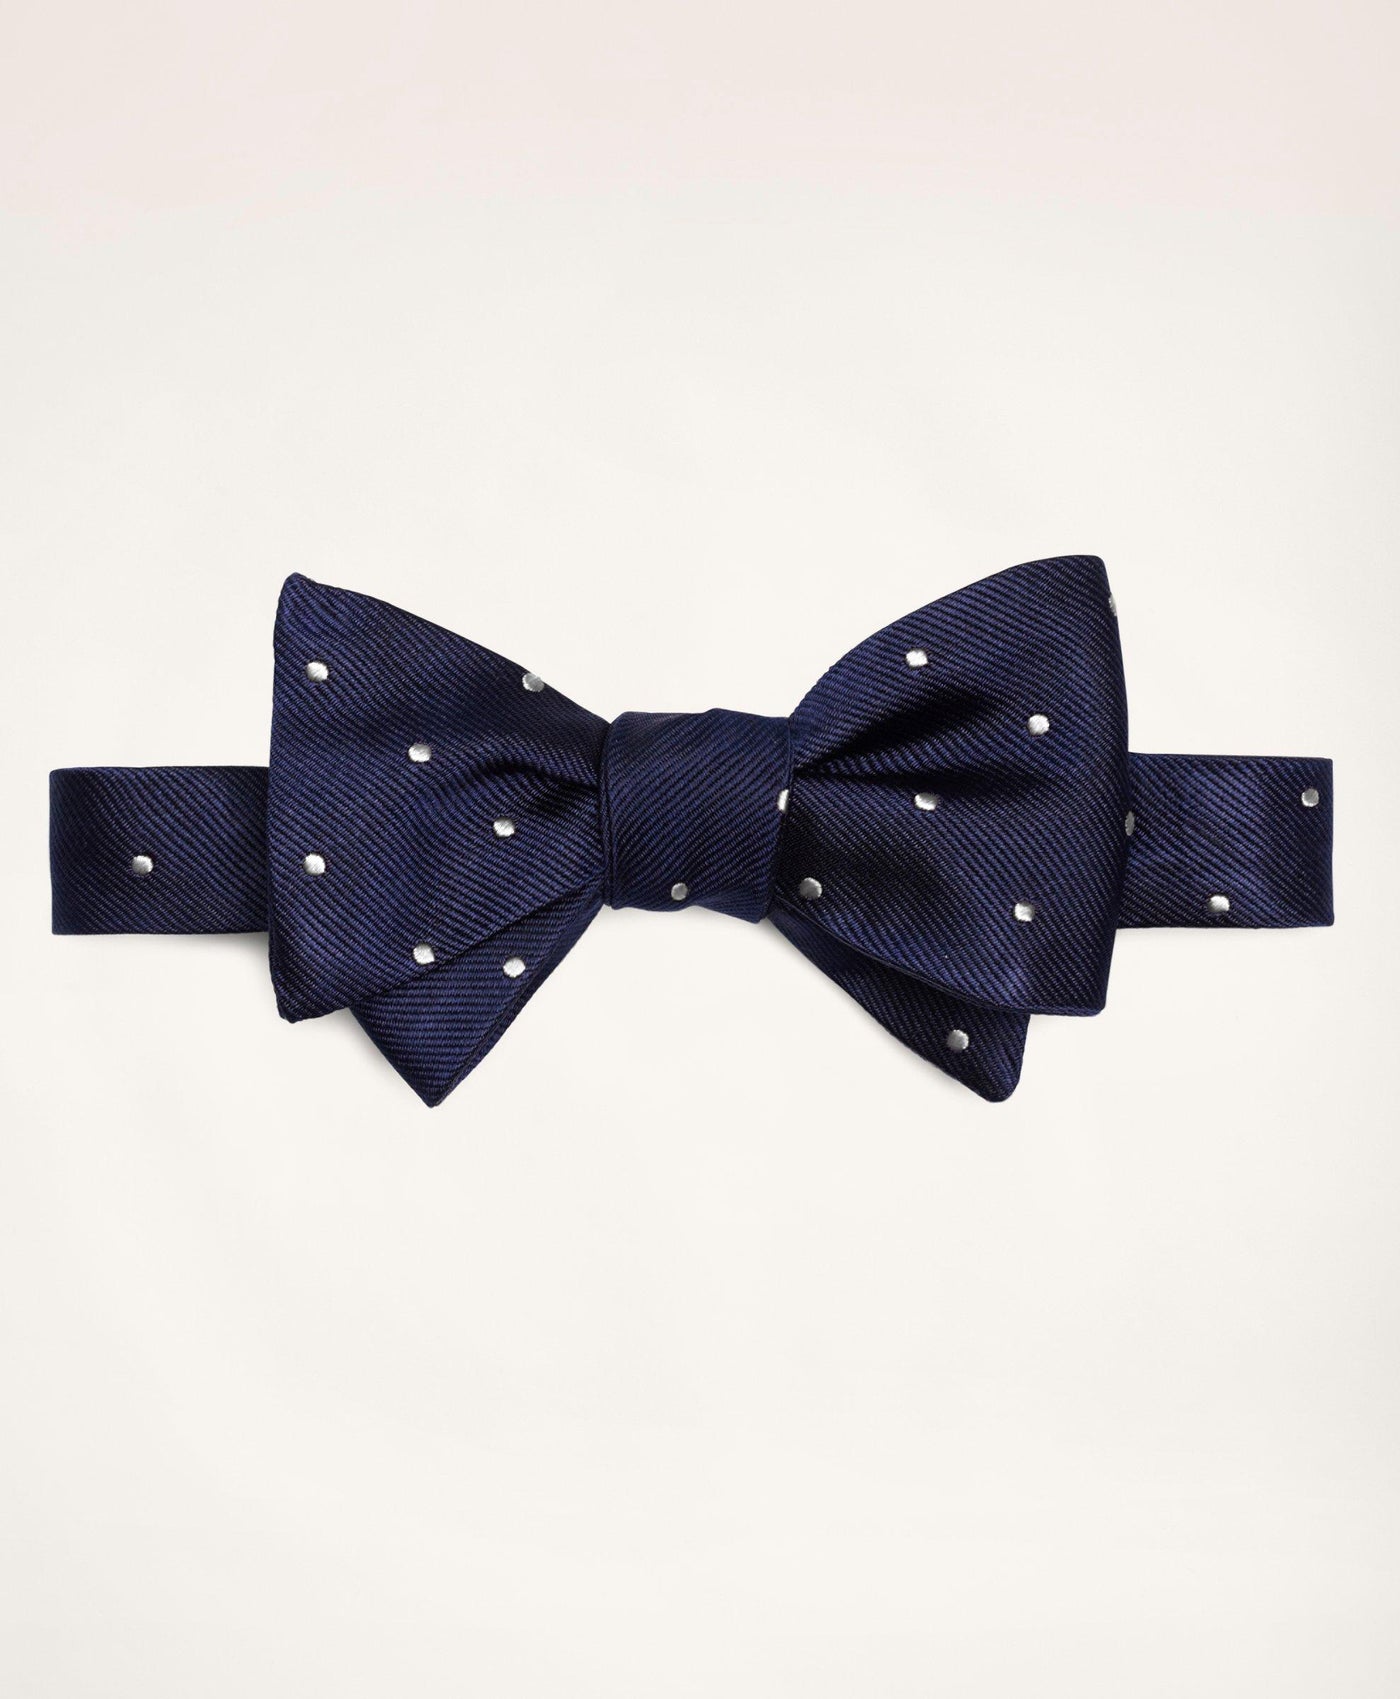 Dot Bow Tie - Brooks Brothers Canada